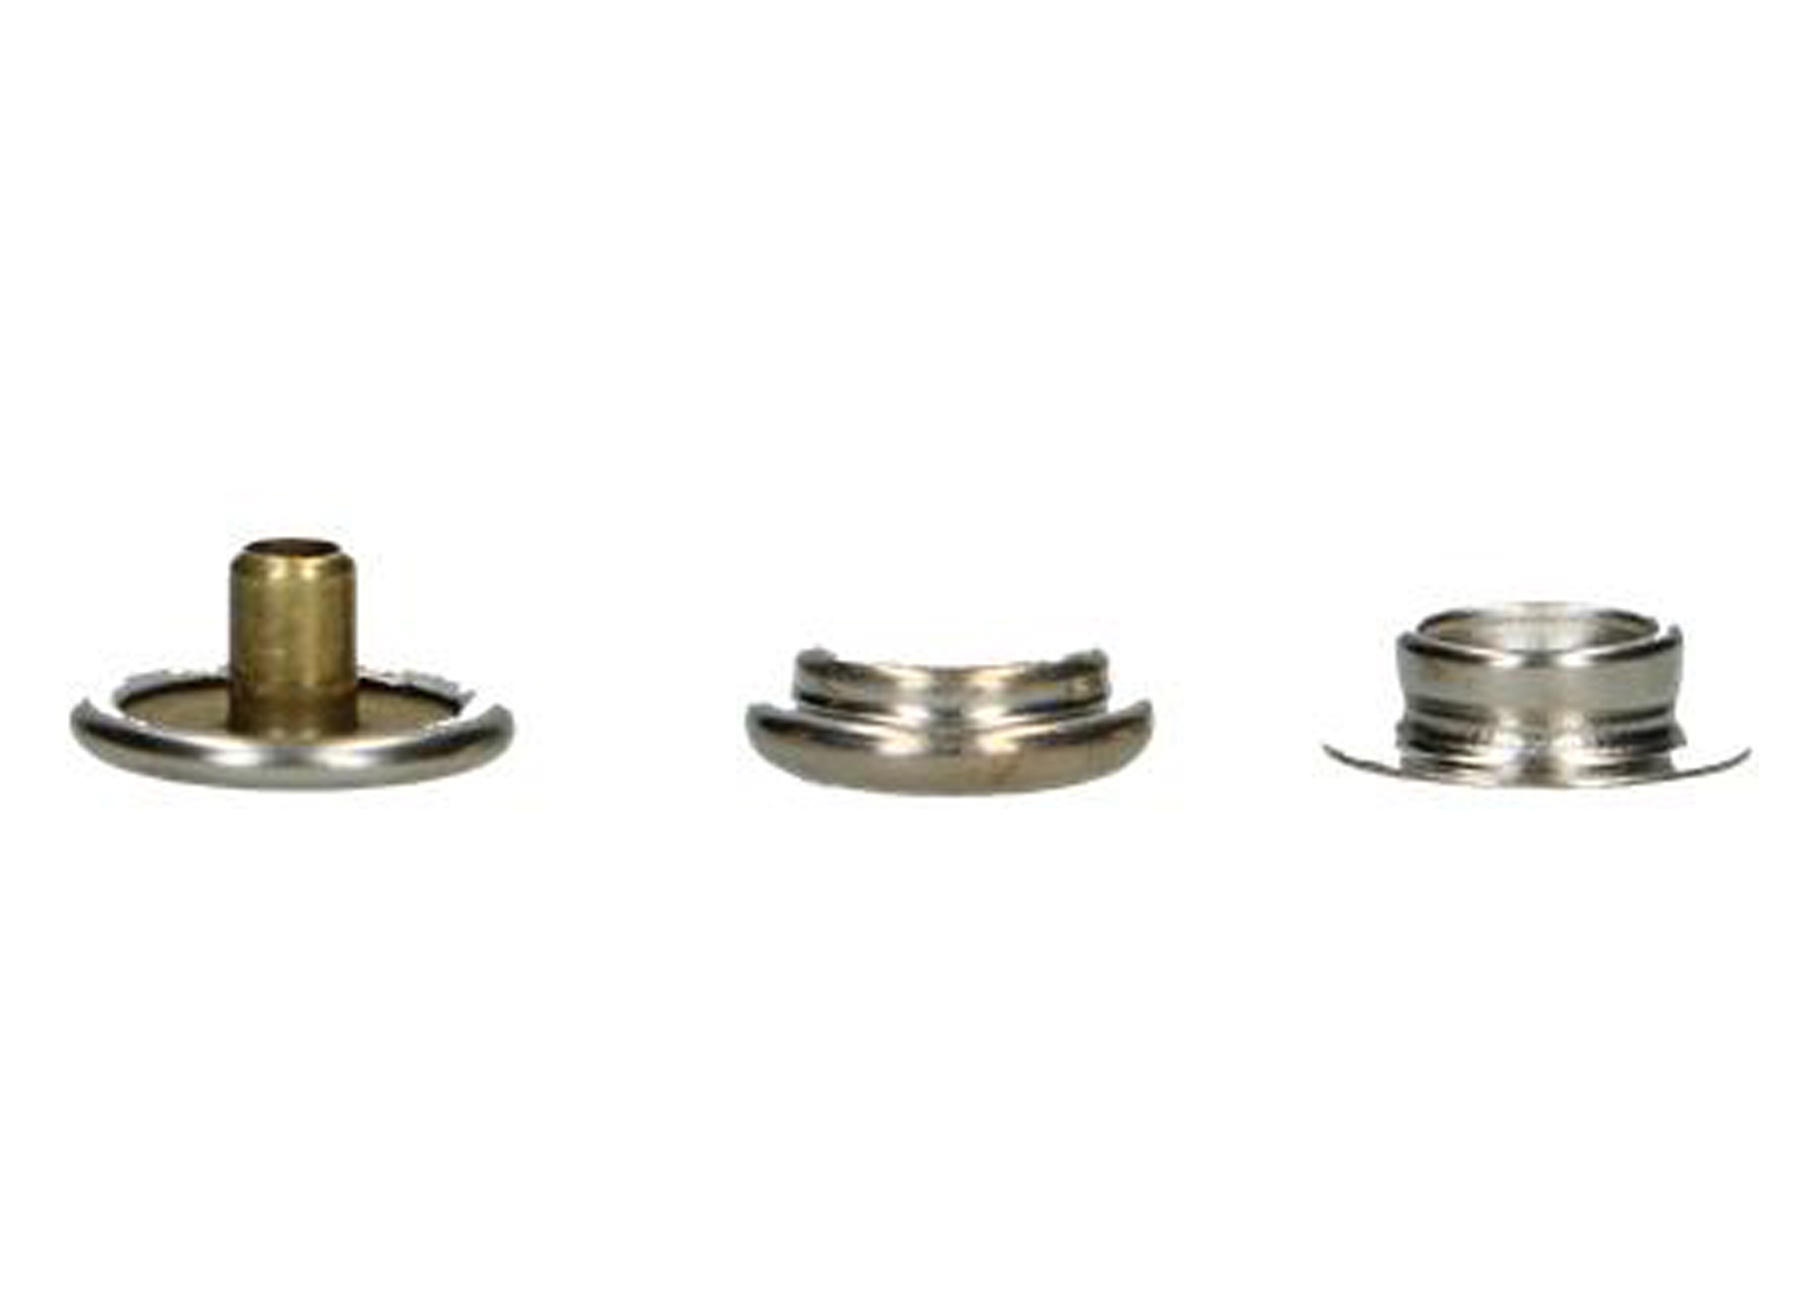 BOUTONS-PRESSION 15MM LAITON BLISTER 3 PC